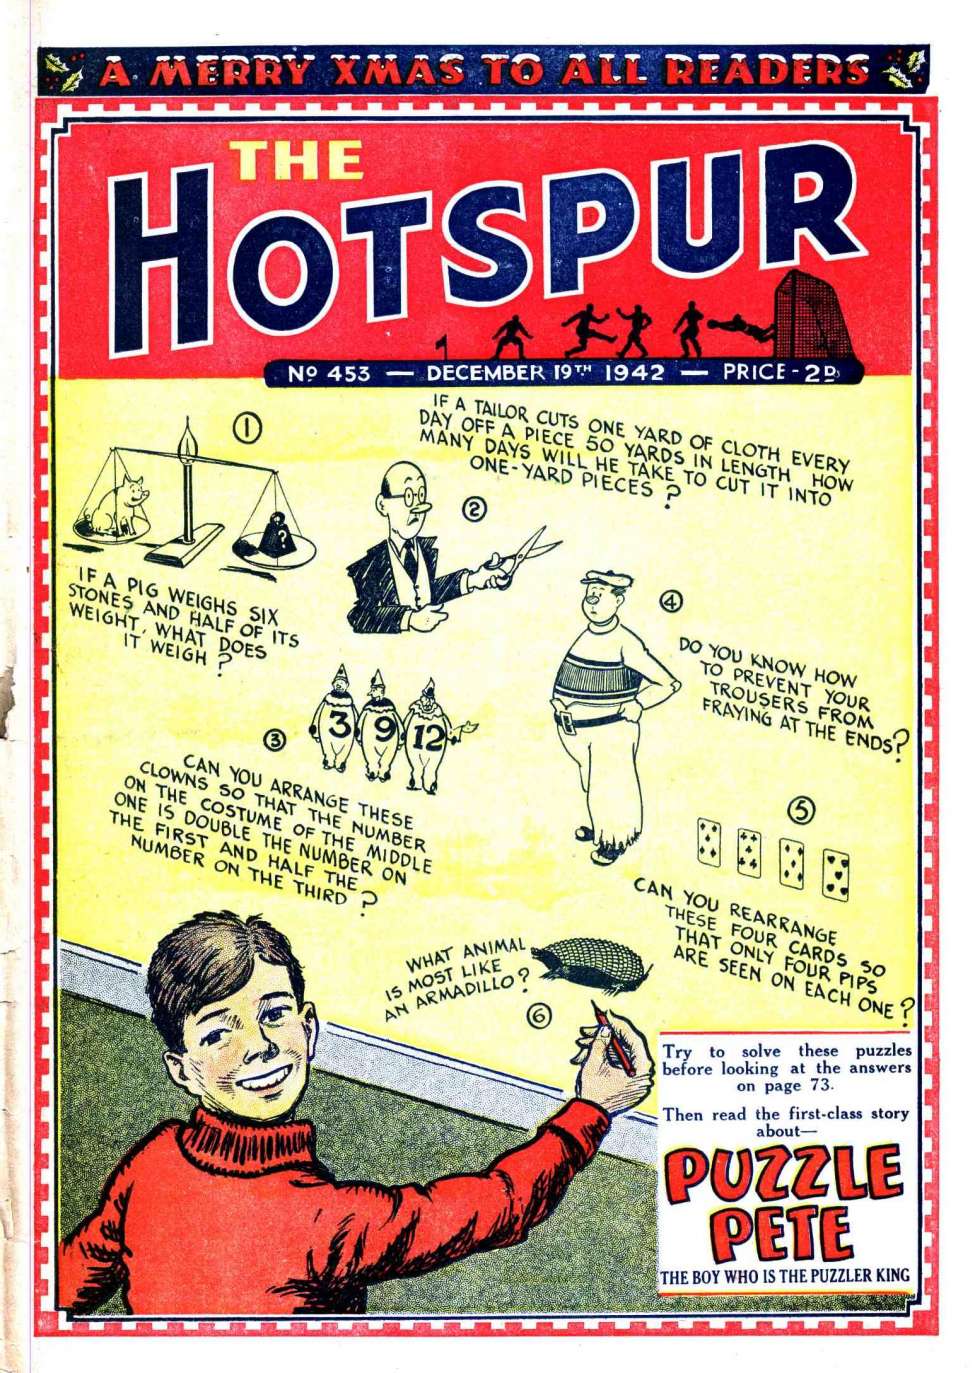 Book Cover For The Hotspur 453